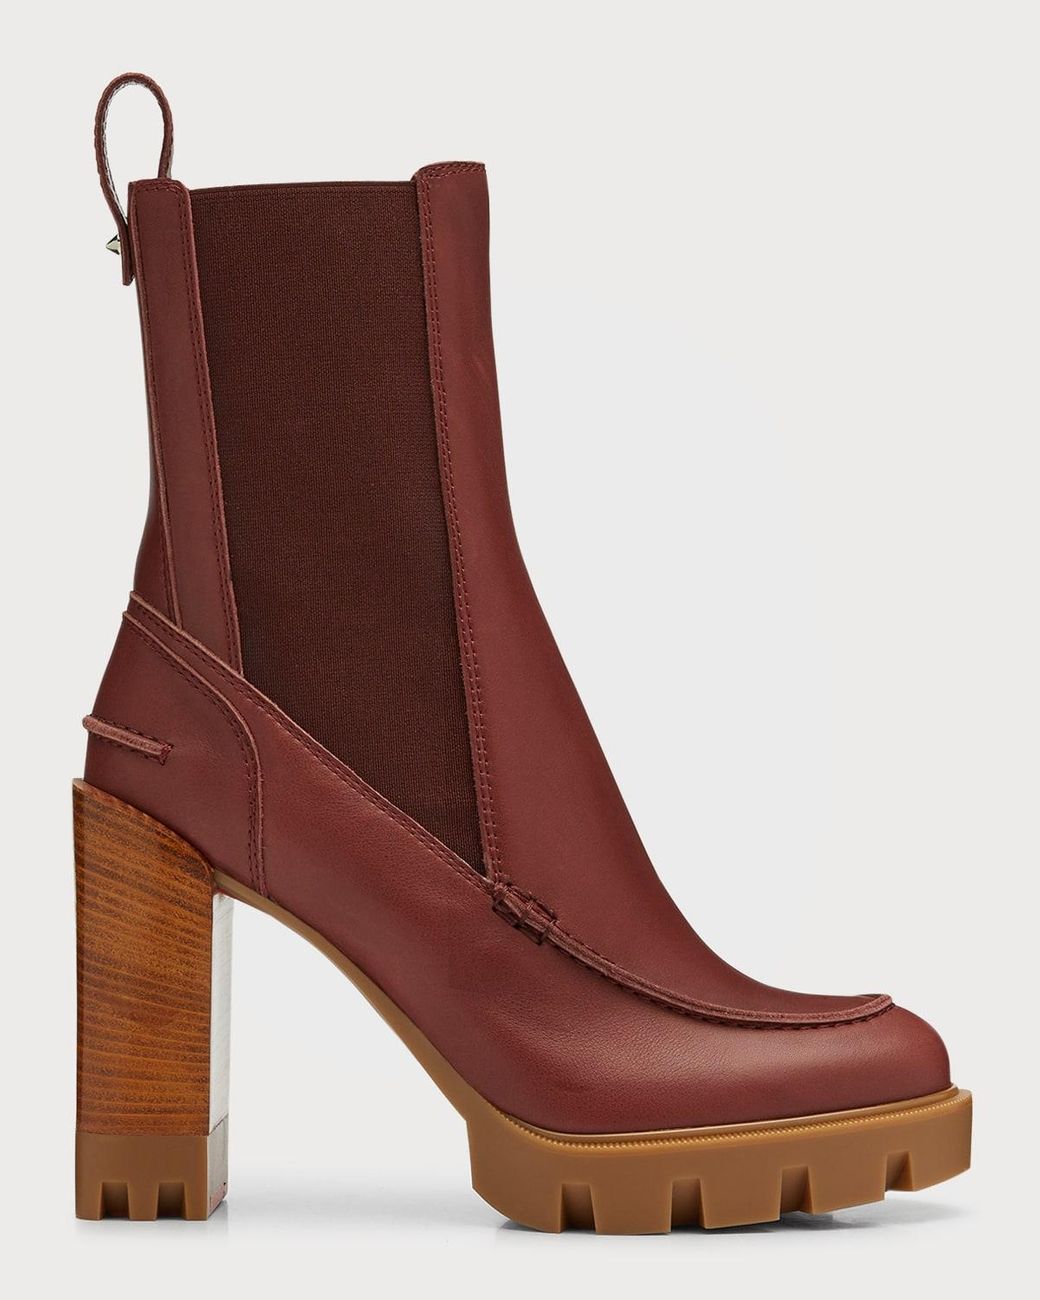 Christian Louboutin Glory Leather Red Sole Chelsea Booties in Brown